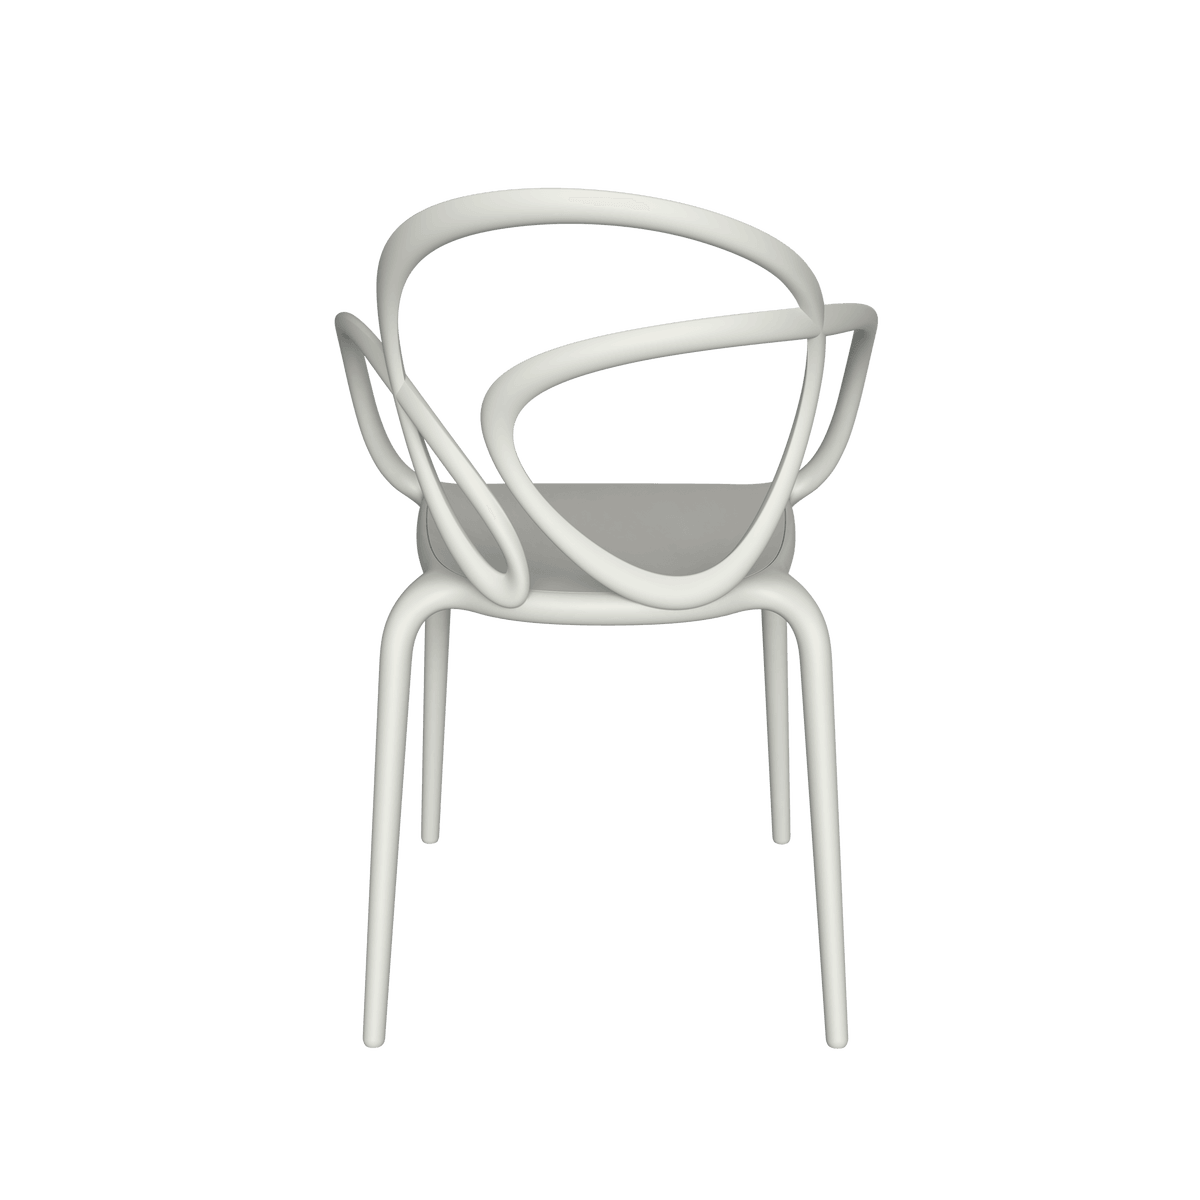 The Loop chair was designed by the Front group, whose members are Sofia Lagerkvist and Anna Lindgren. Their ideas for work are created during joint discussions and creative experiments and girls also participate in the entire creation process from the idea through production to finish.